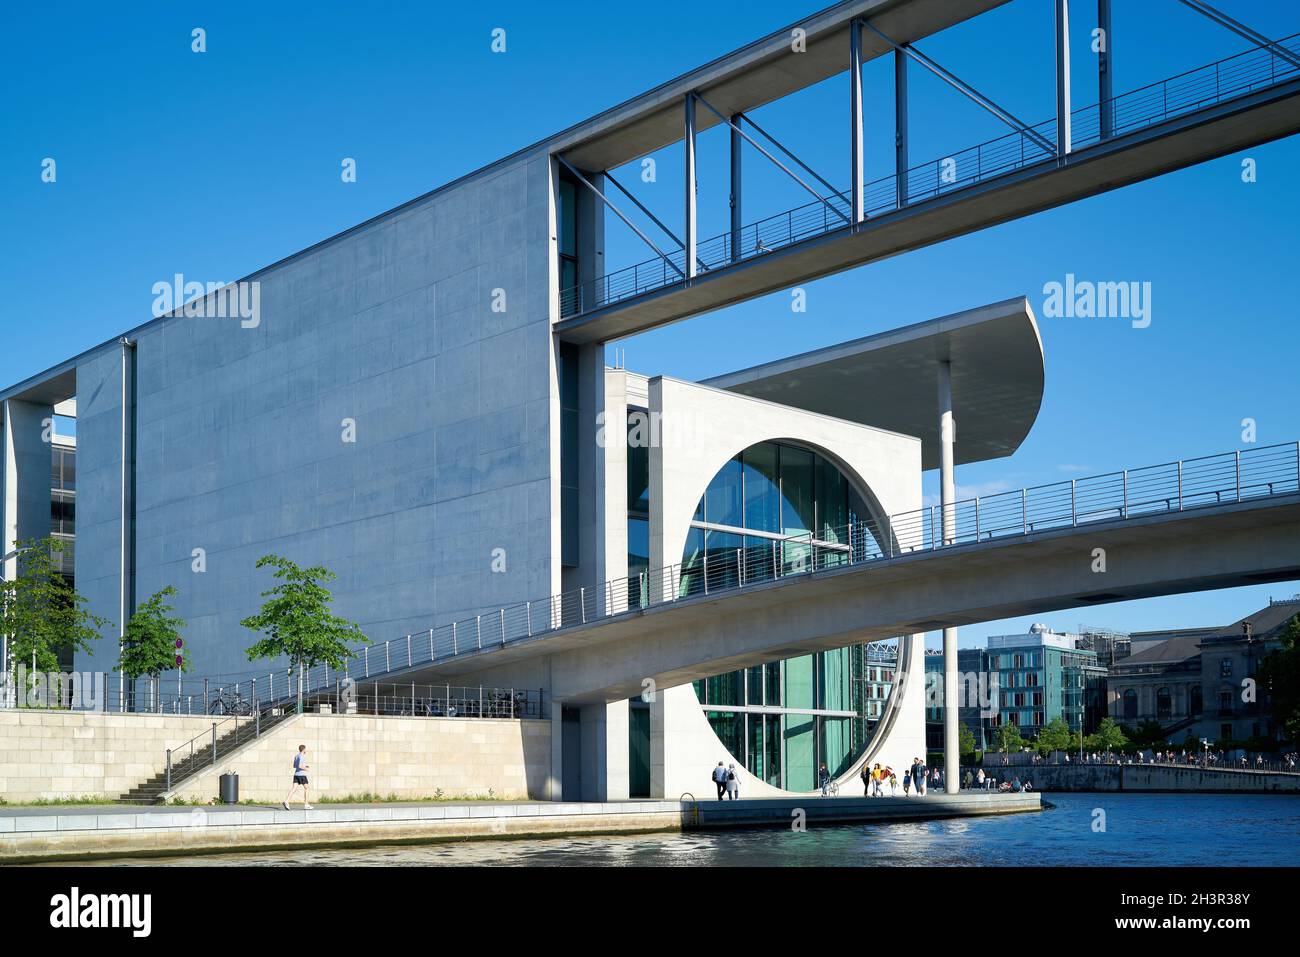 Marie-Elisabeth-Lueders-Haus in the government district on the banks of the river Spree in Berlin Stock Photo